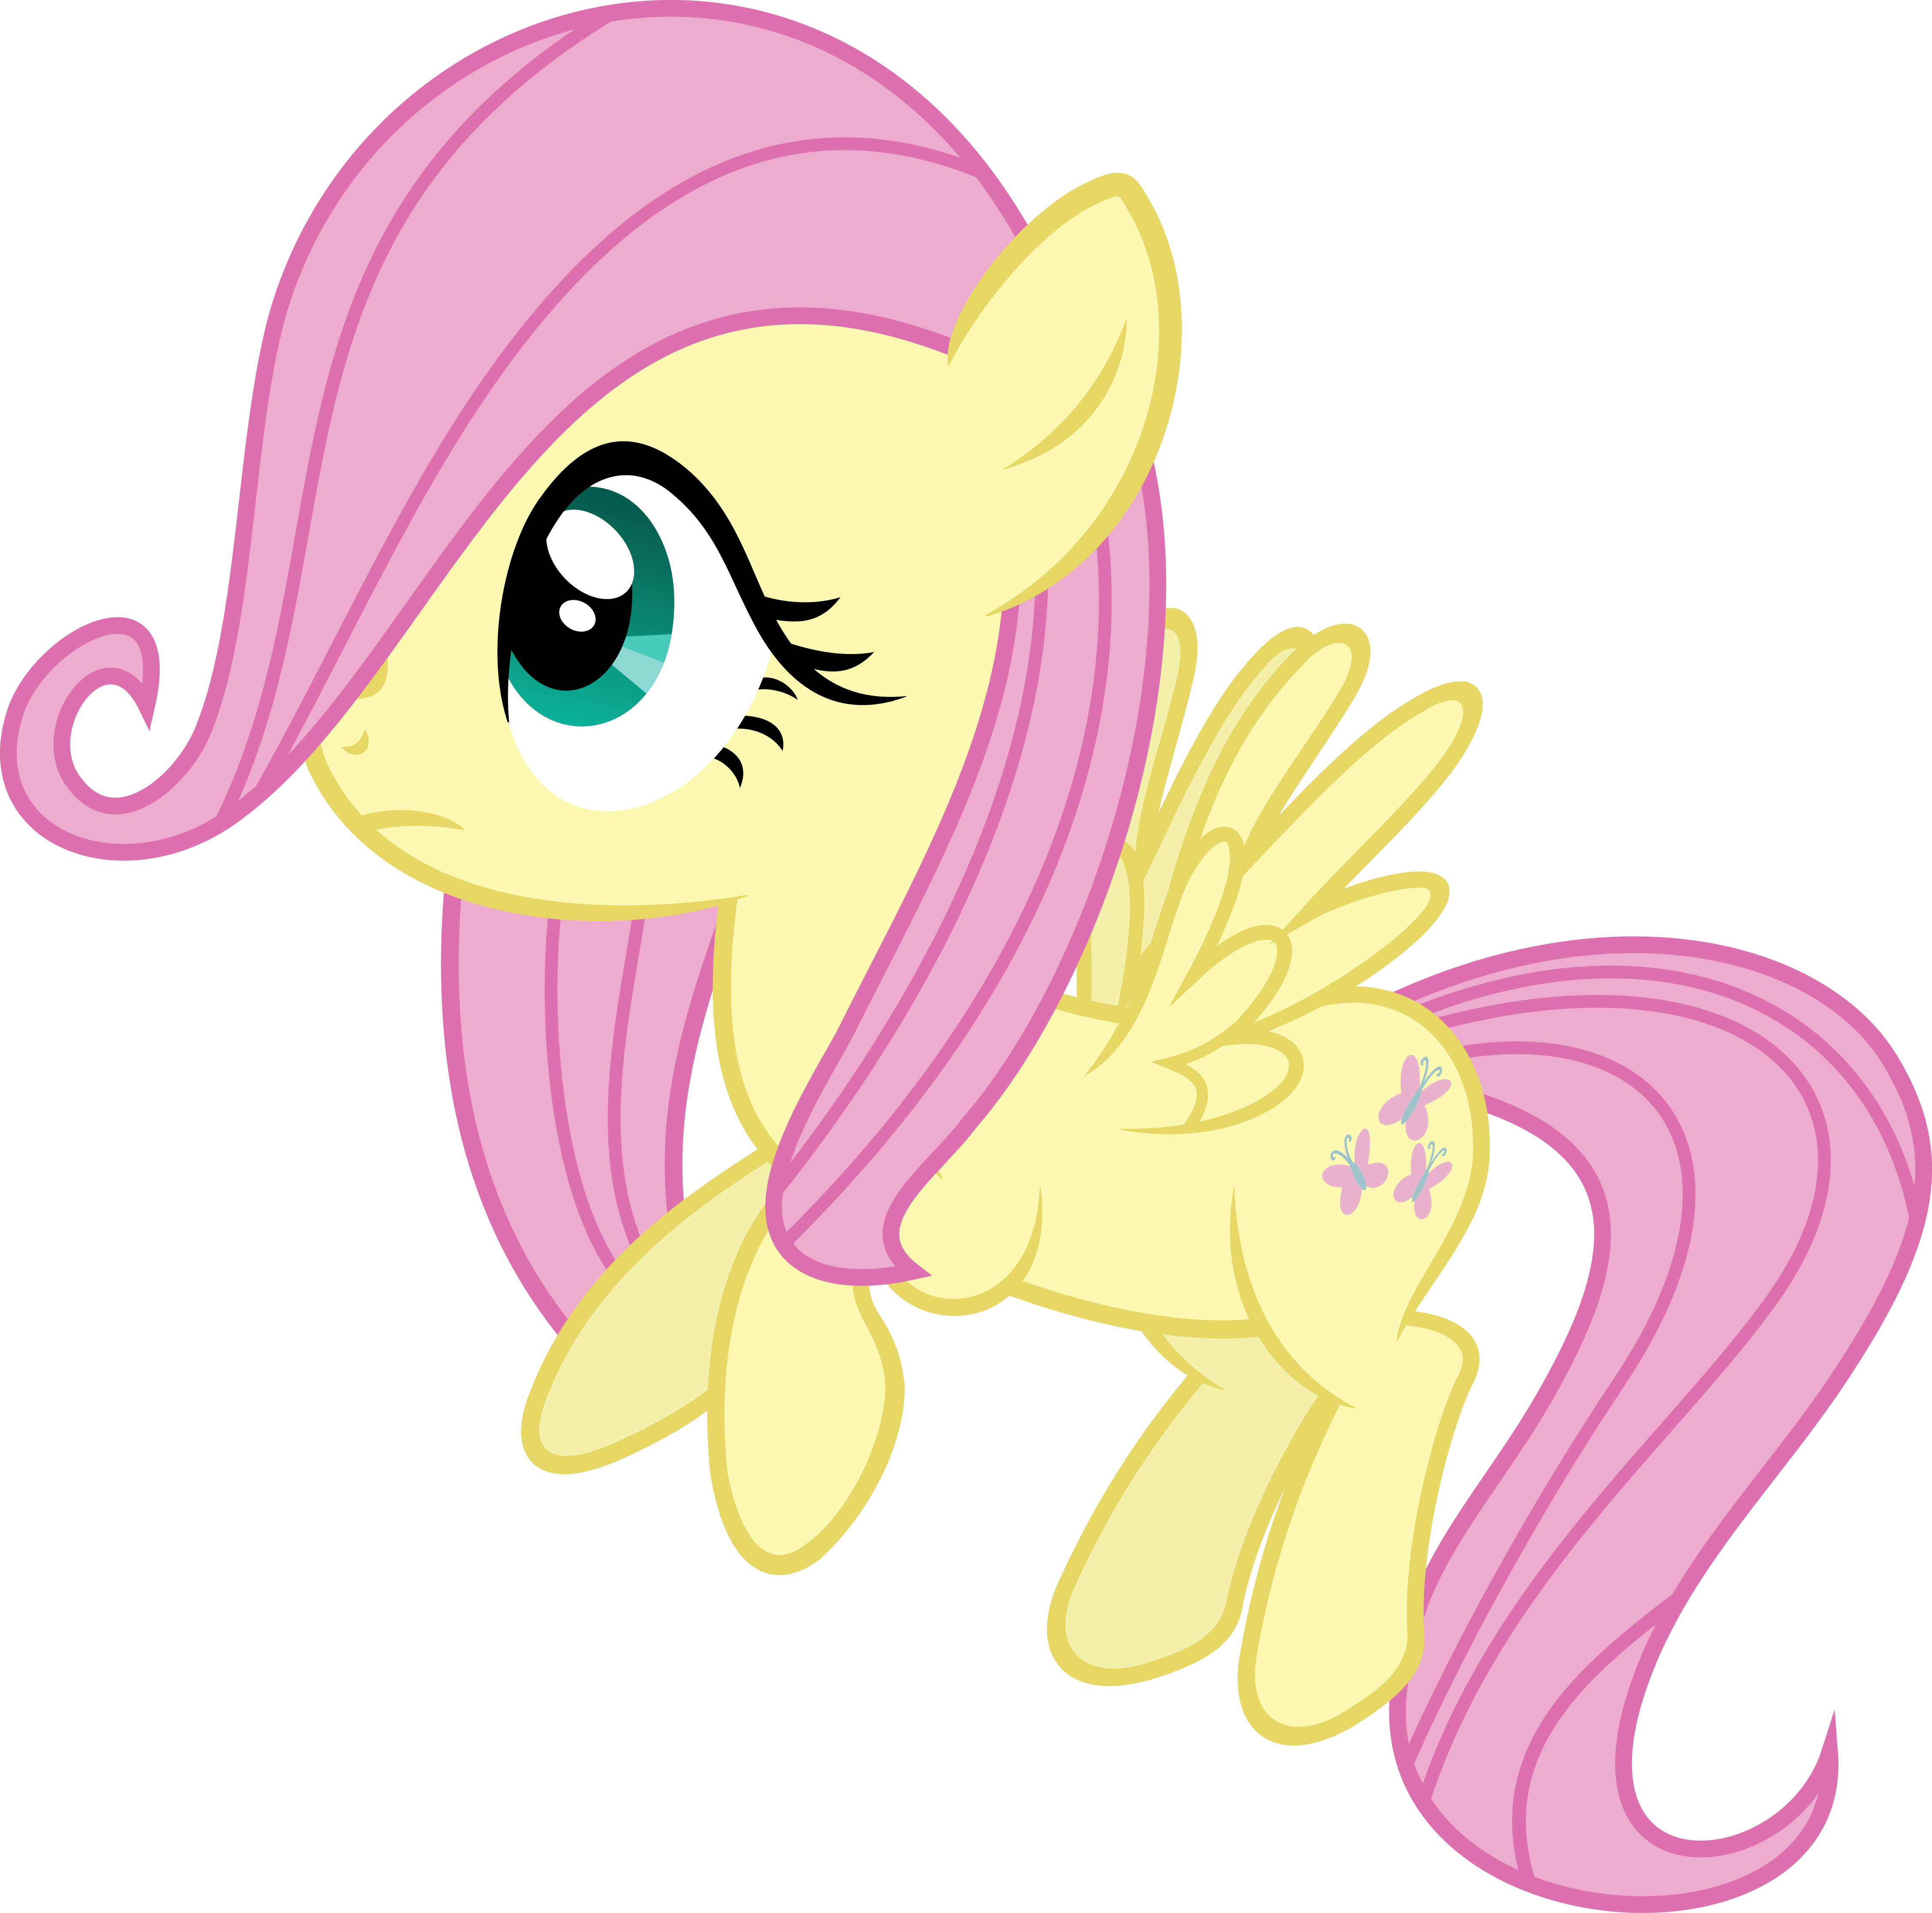 1426781__safe_artist-colon-slb94_fluttershy_cute_flying_vector_younger.png